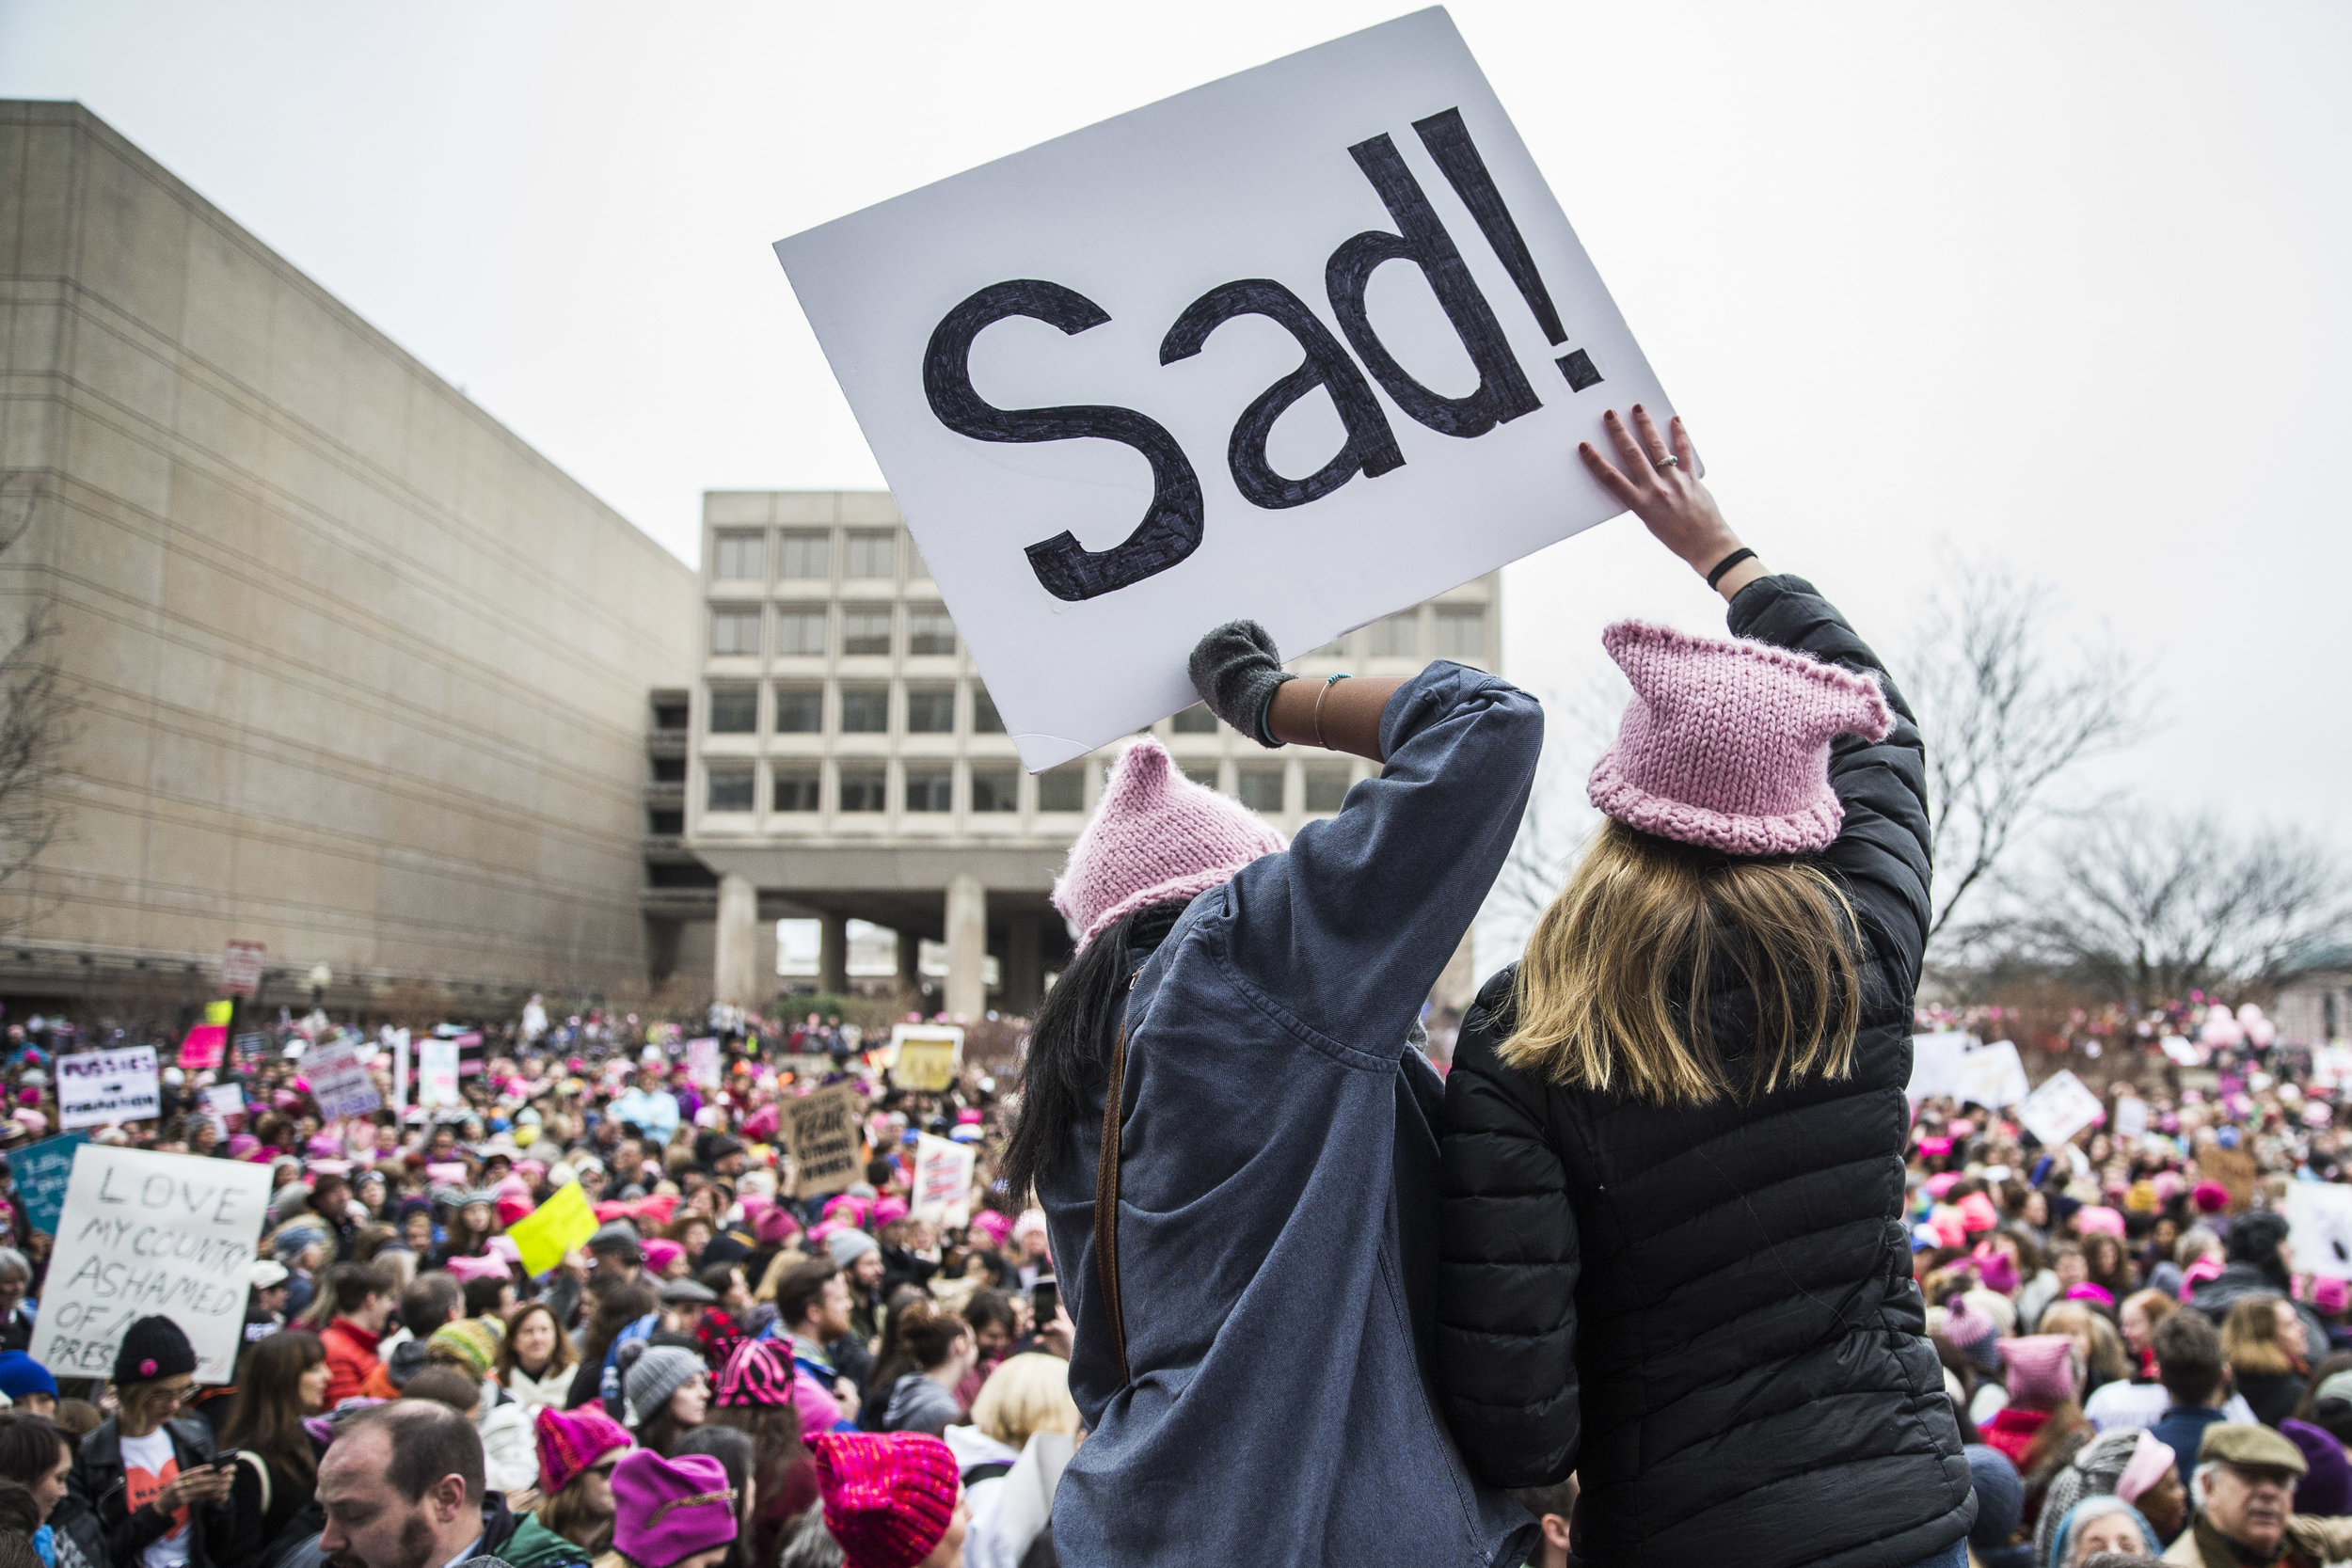  Protesters gather on Independence Avenue during the Women March on Washington on January 21, 2017 